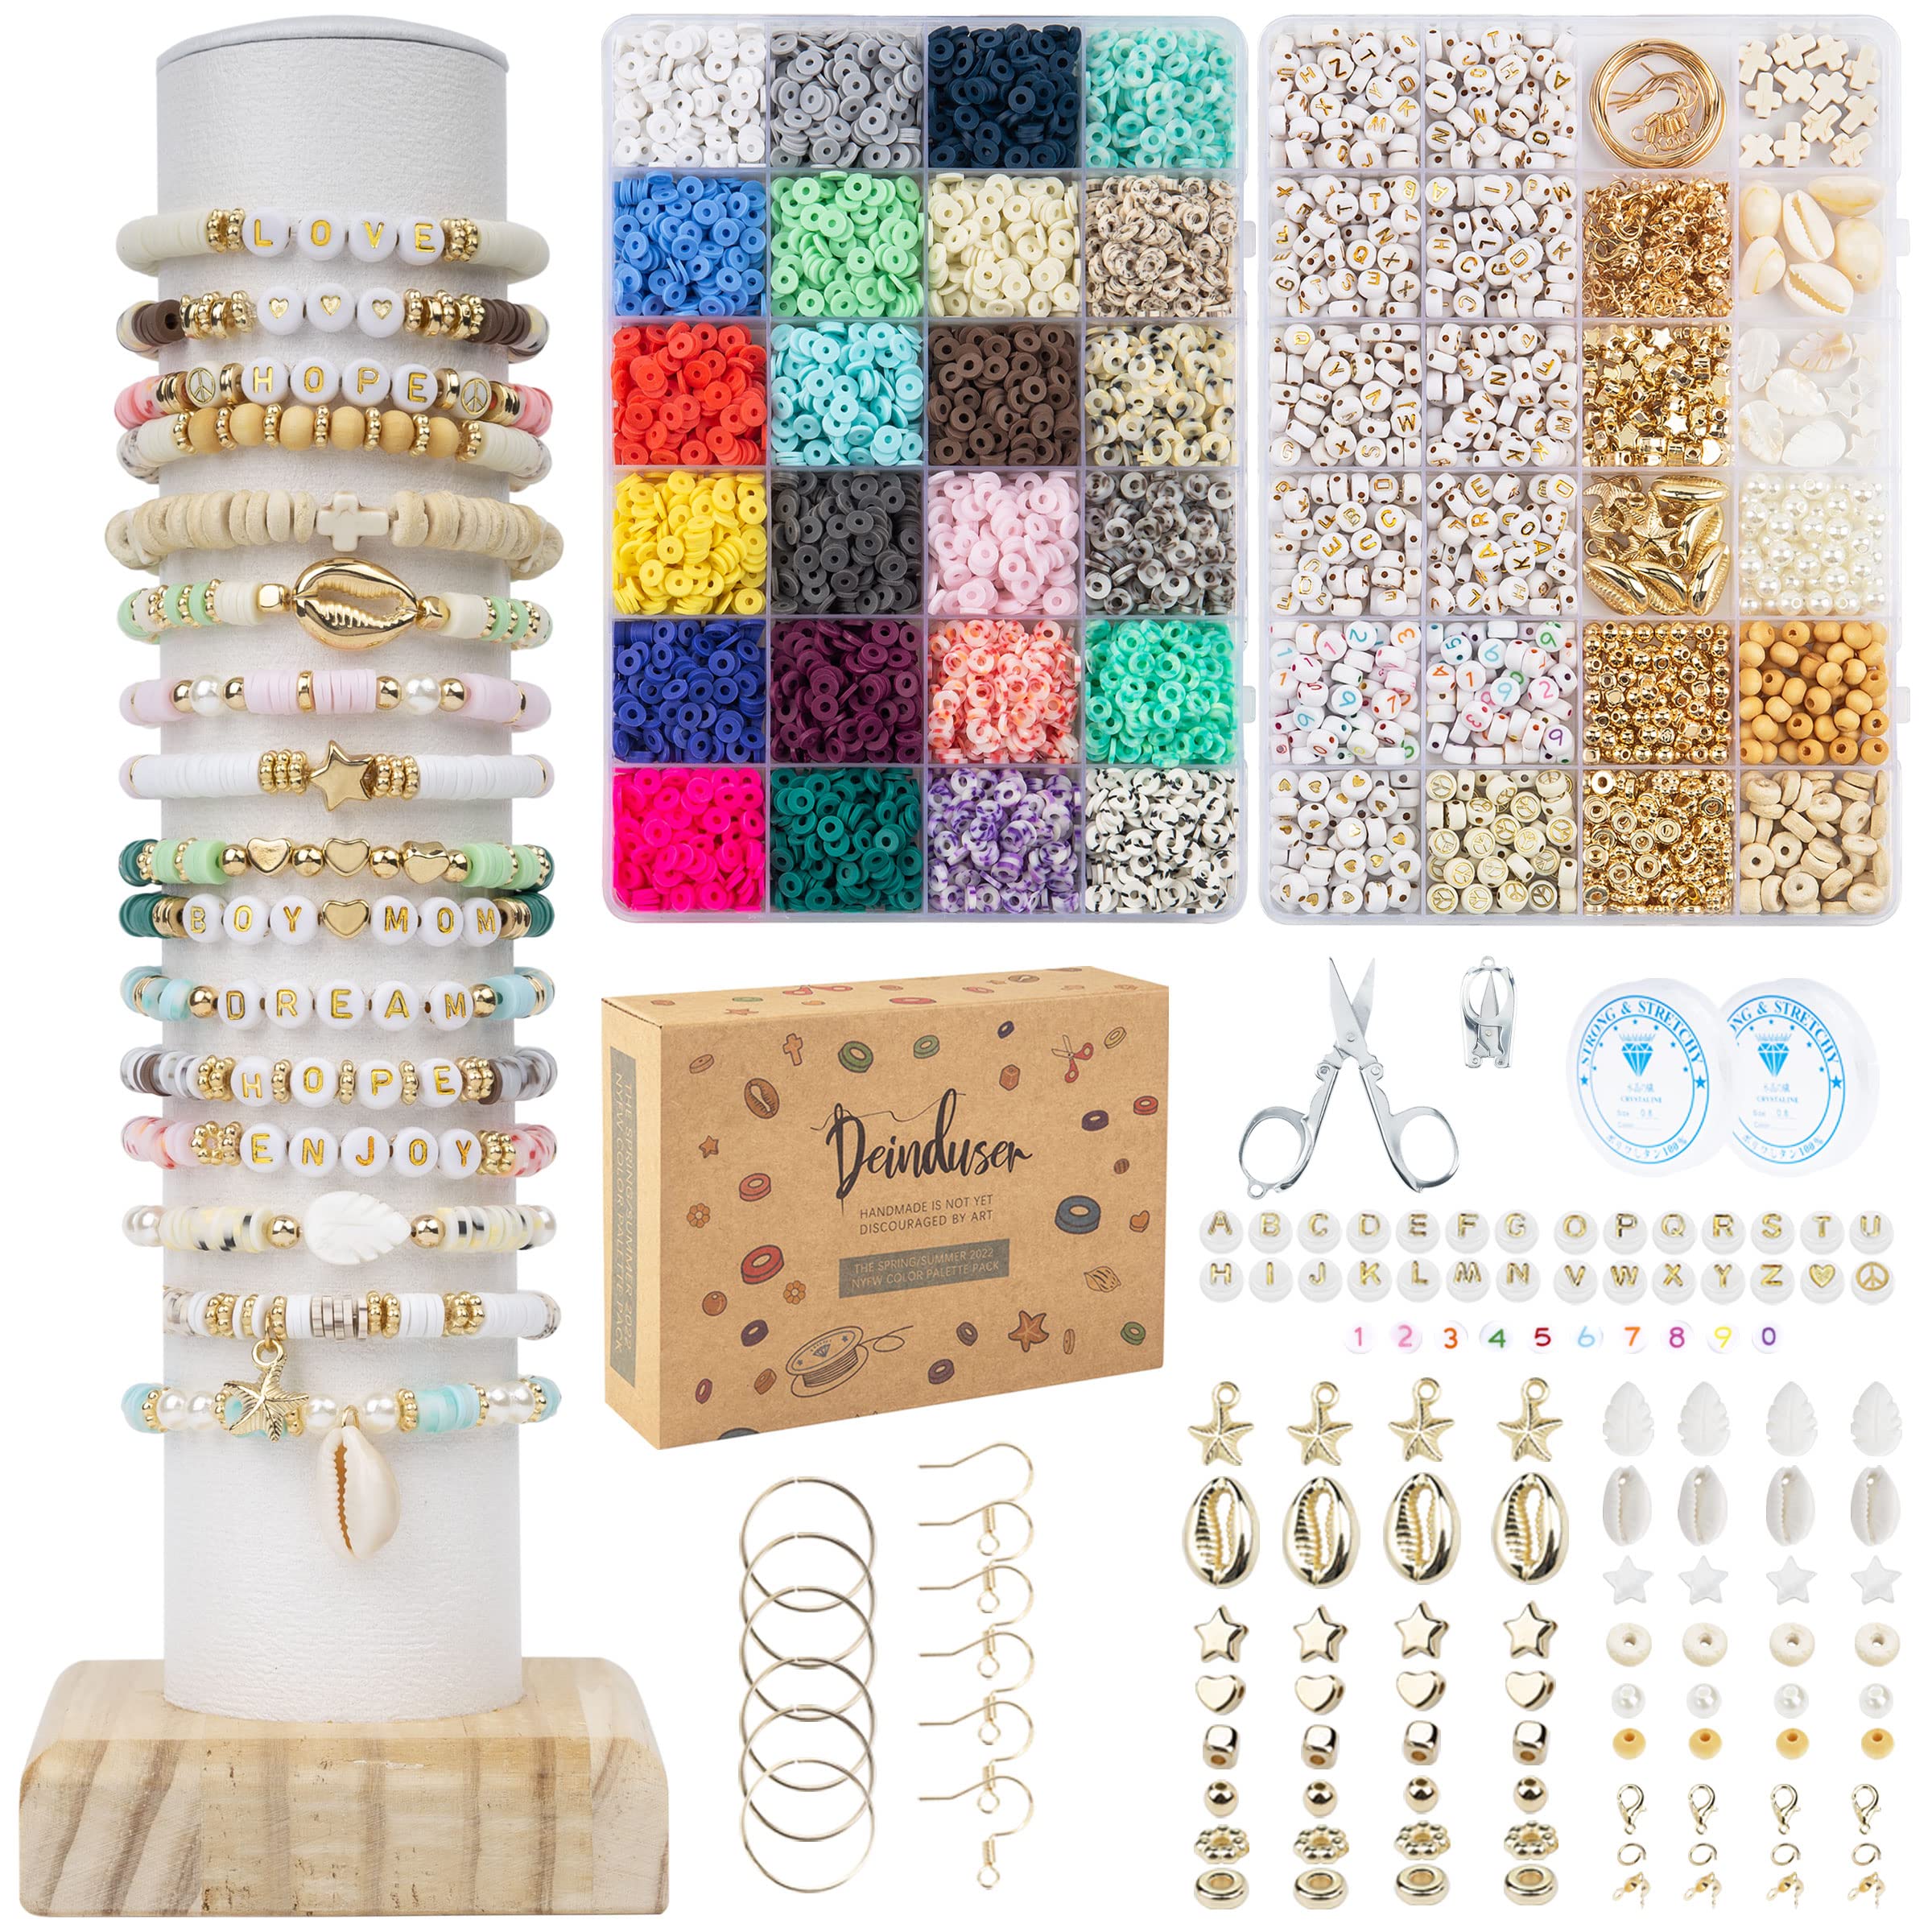 Clay Beads 7200 Pcs 2 Boxes Bracelet Making Kit - 24 Colors Polymer Clay